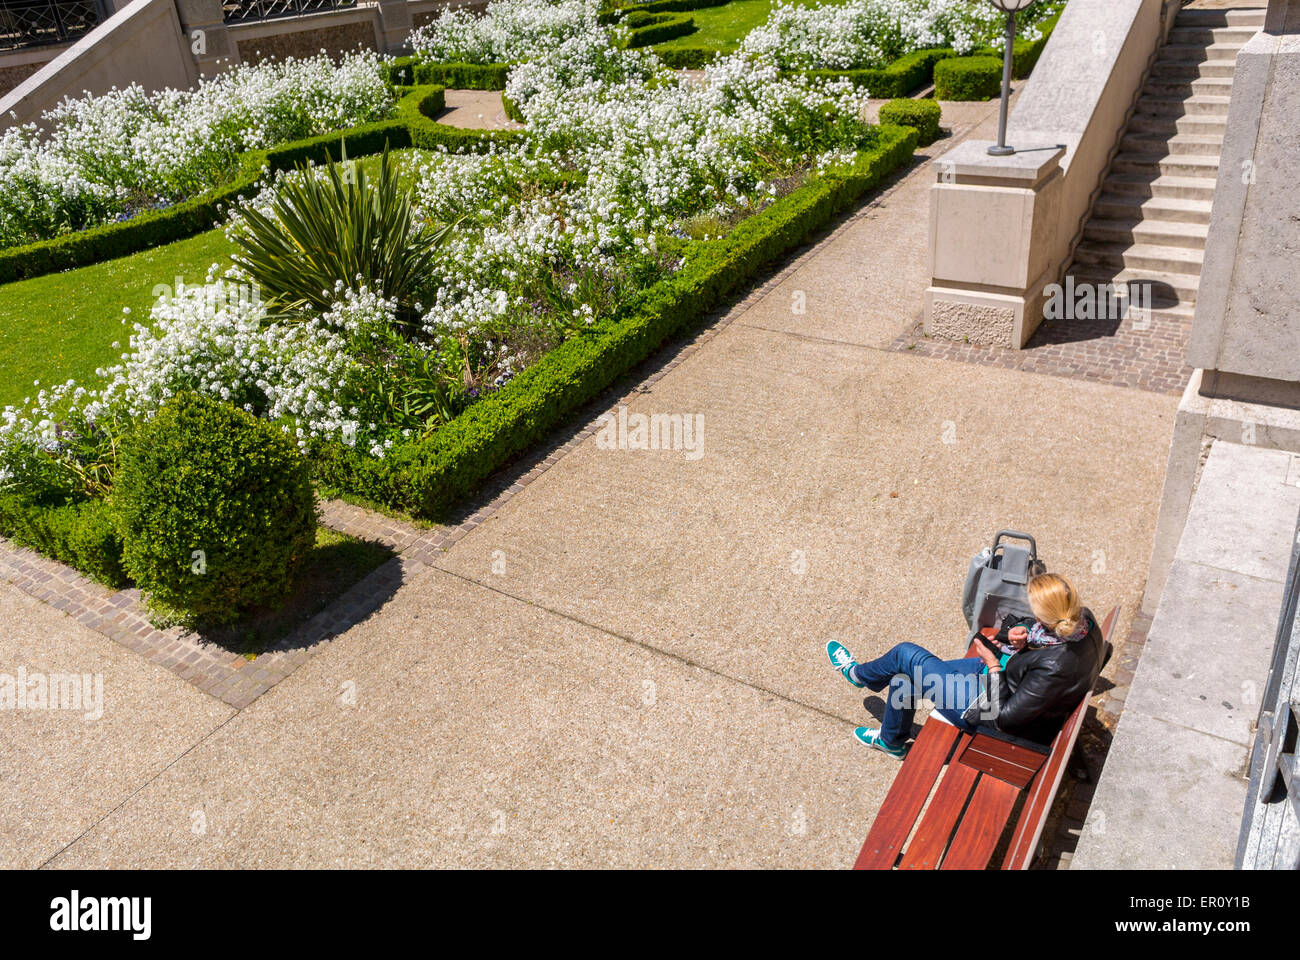 Woman in Garden, Paris, France, Charenton-Le-Pont, Suburbs, Aerial View,  Reading, Sitting, on Public Bench in Town Square, suburban neighborhood, garden urban france Stock Photo